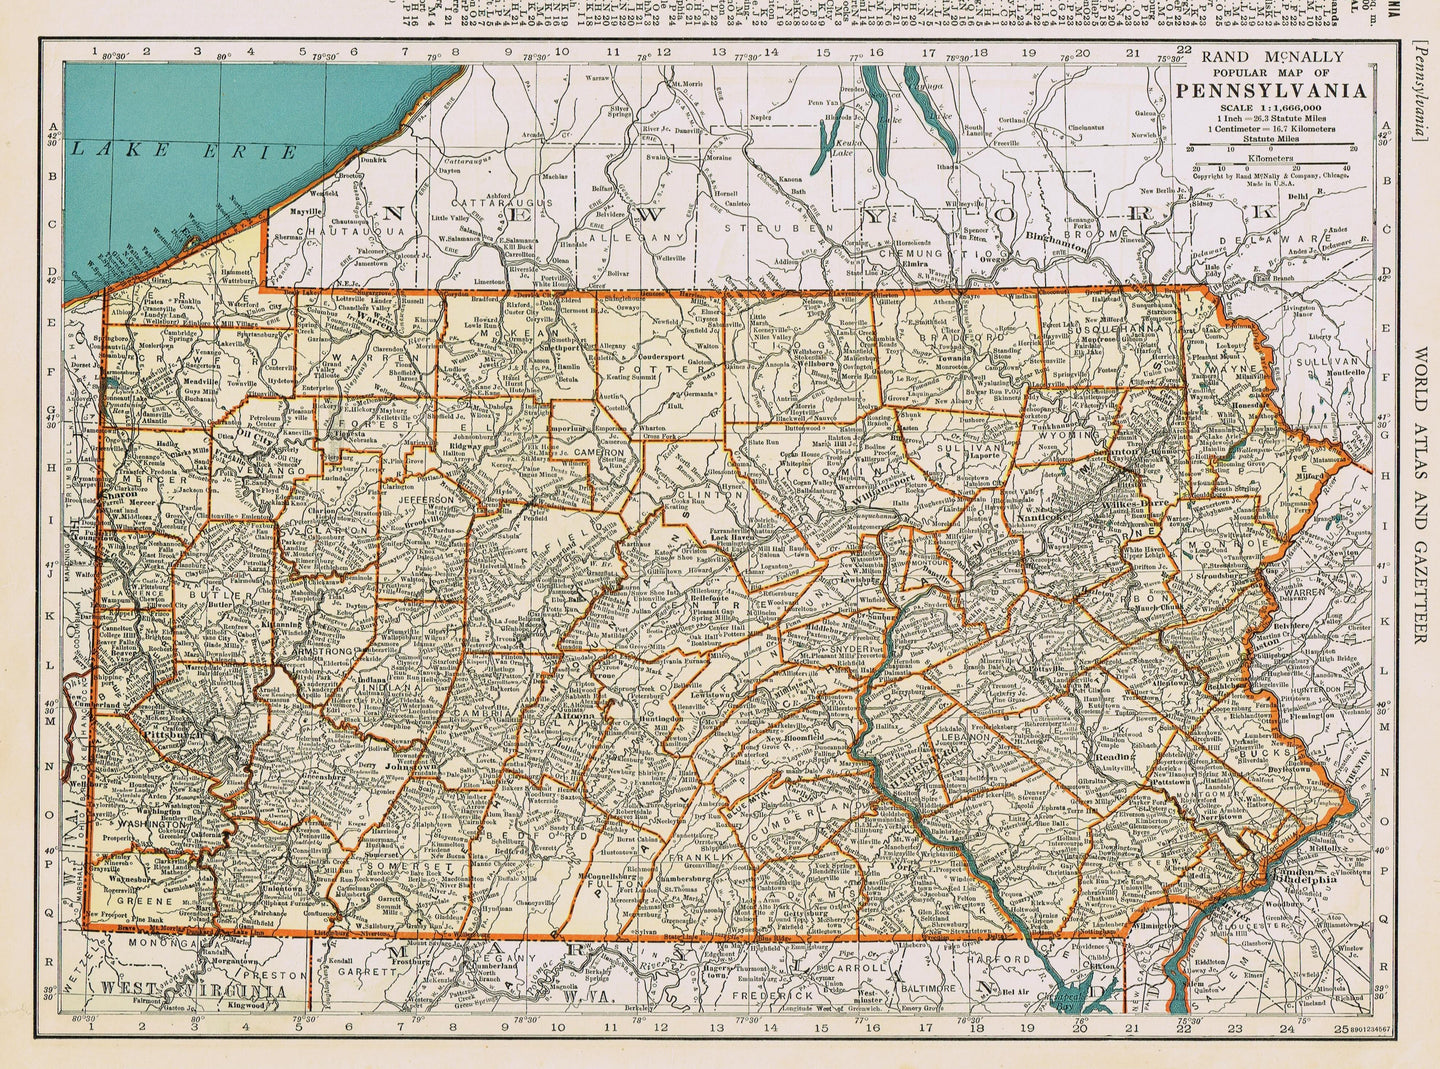 Genuine-Antique-Map-Popular-Map-of-Pennsylvania-1940-Rand-McNally-Maps-Of-Antiquity